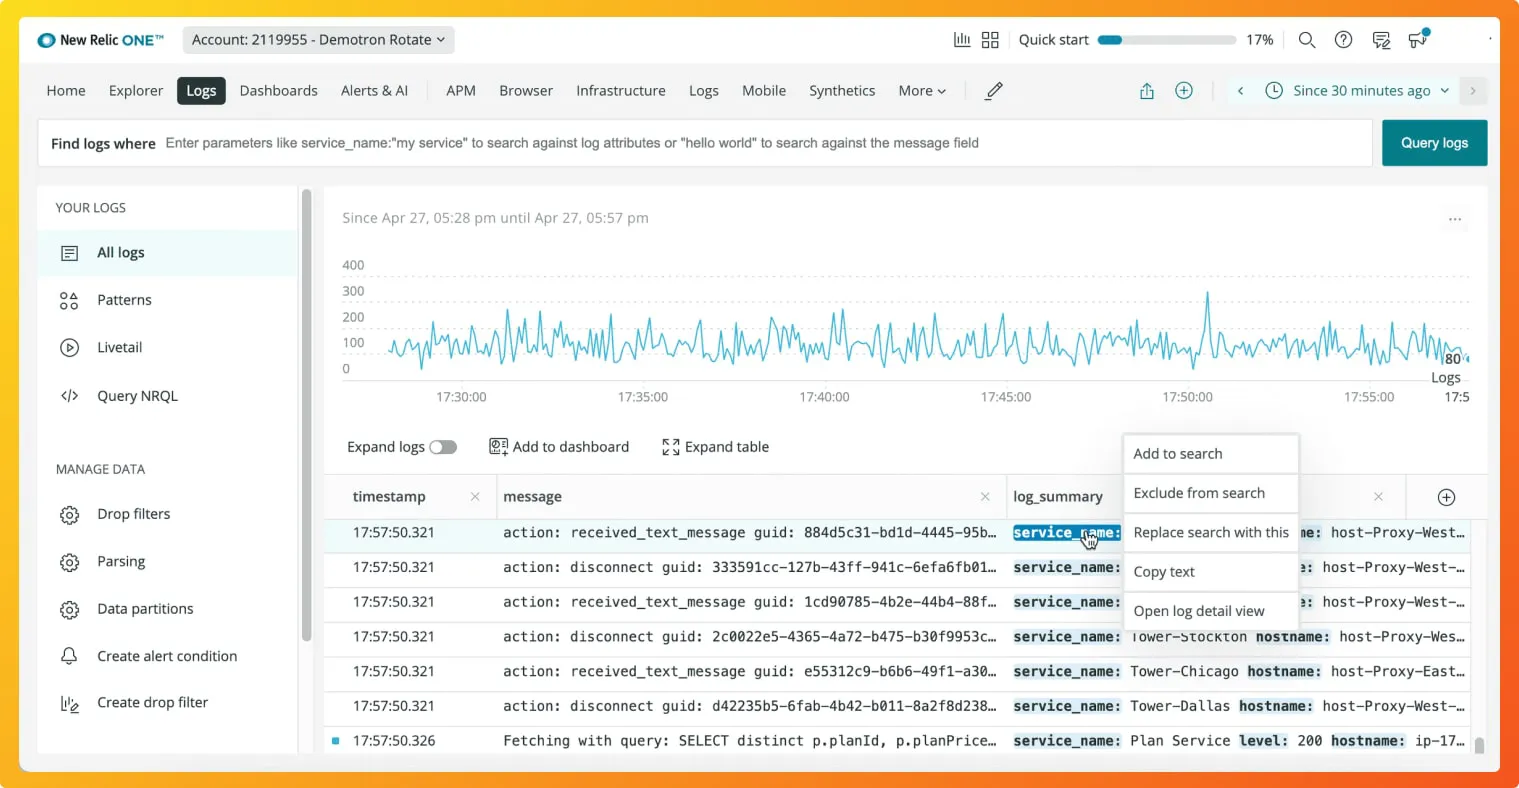 New Relic Log Management Dashboard